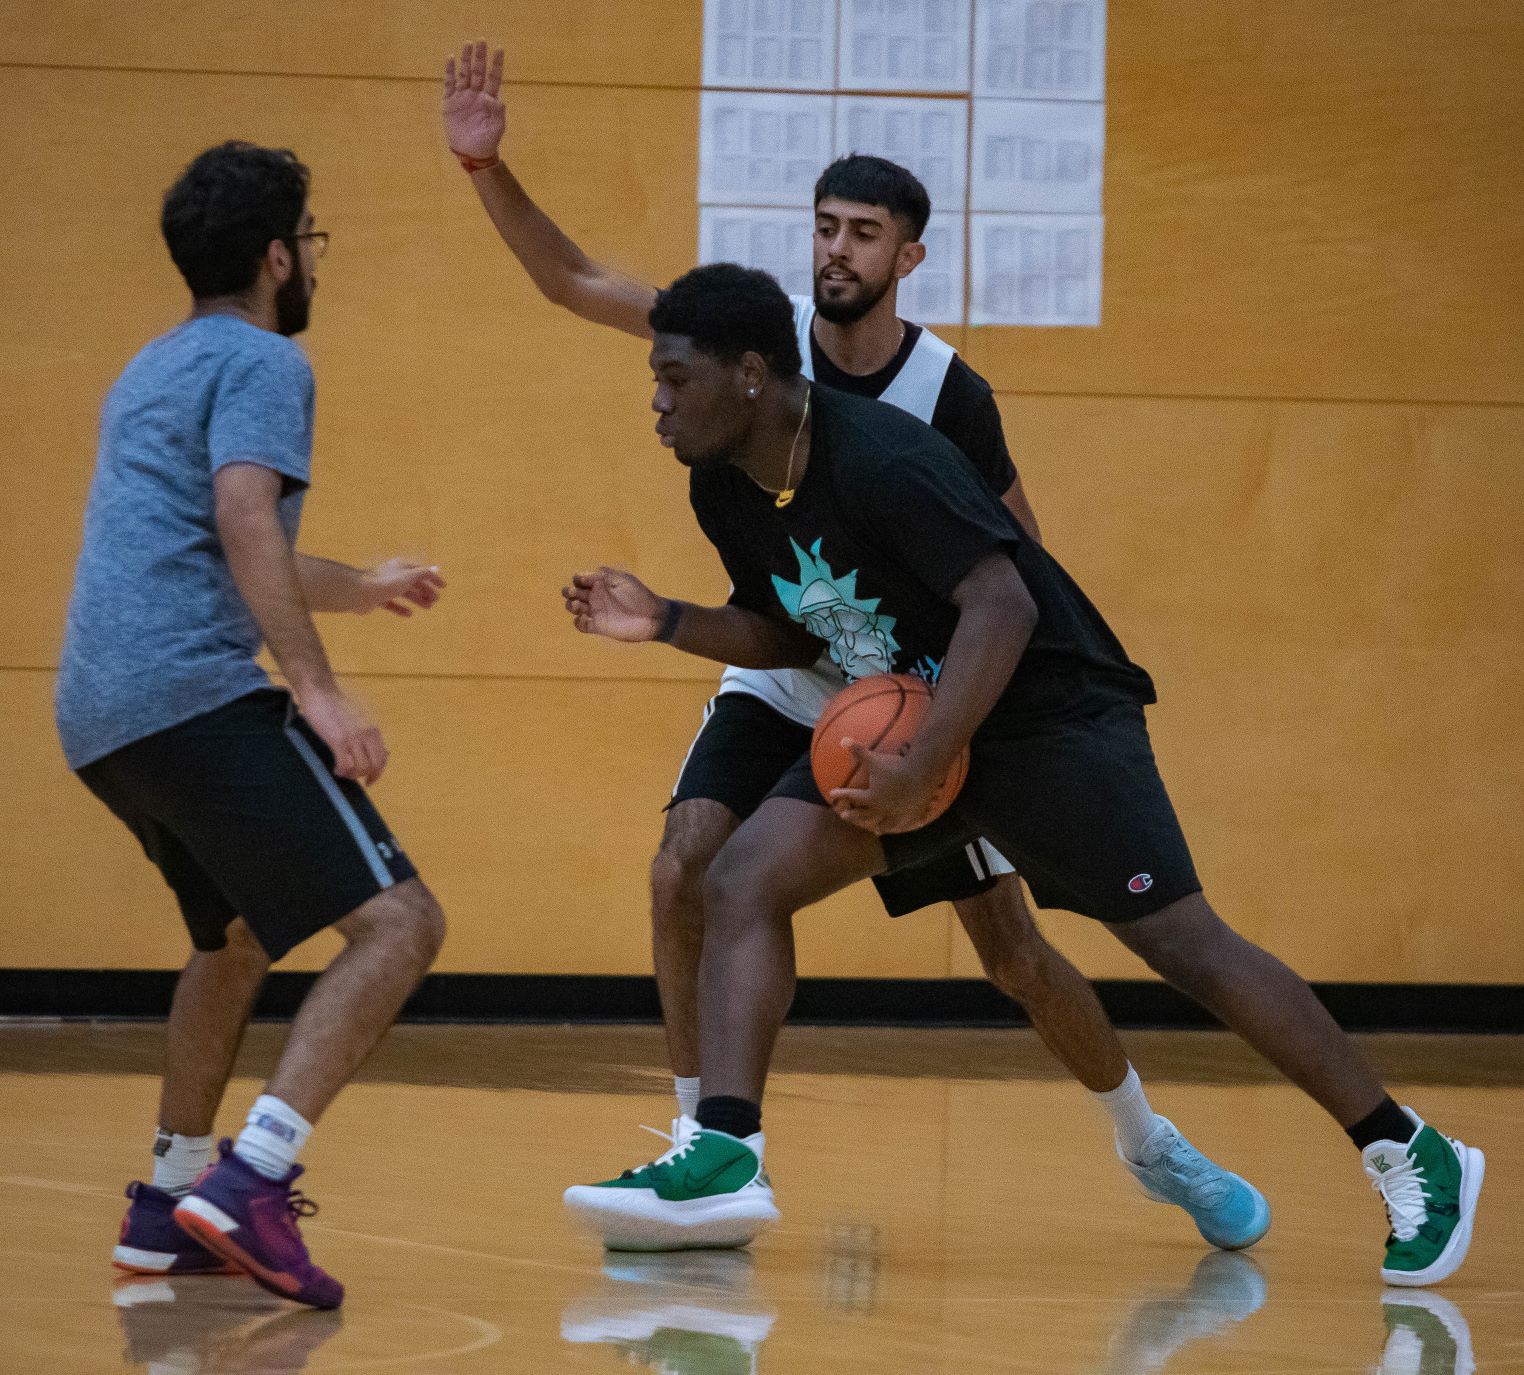 Campus Recreation Drop-in Basketball